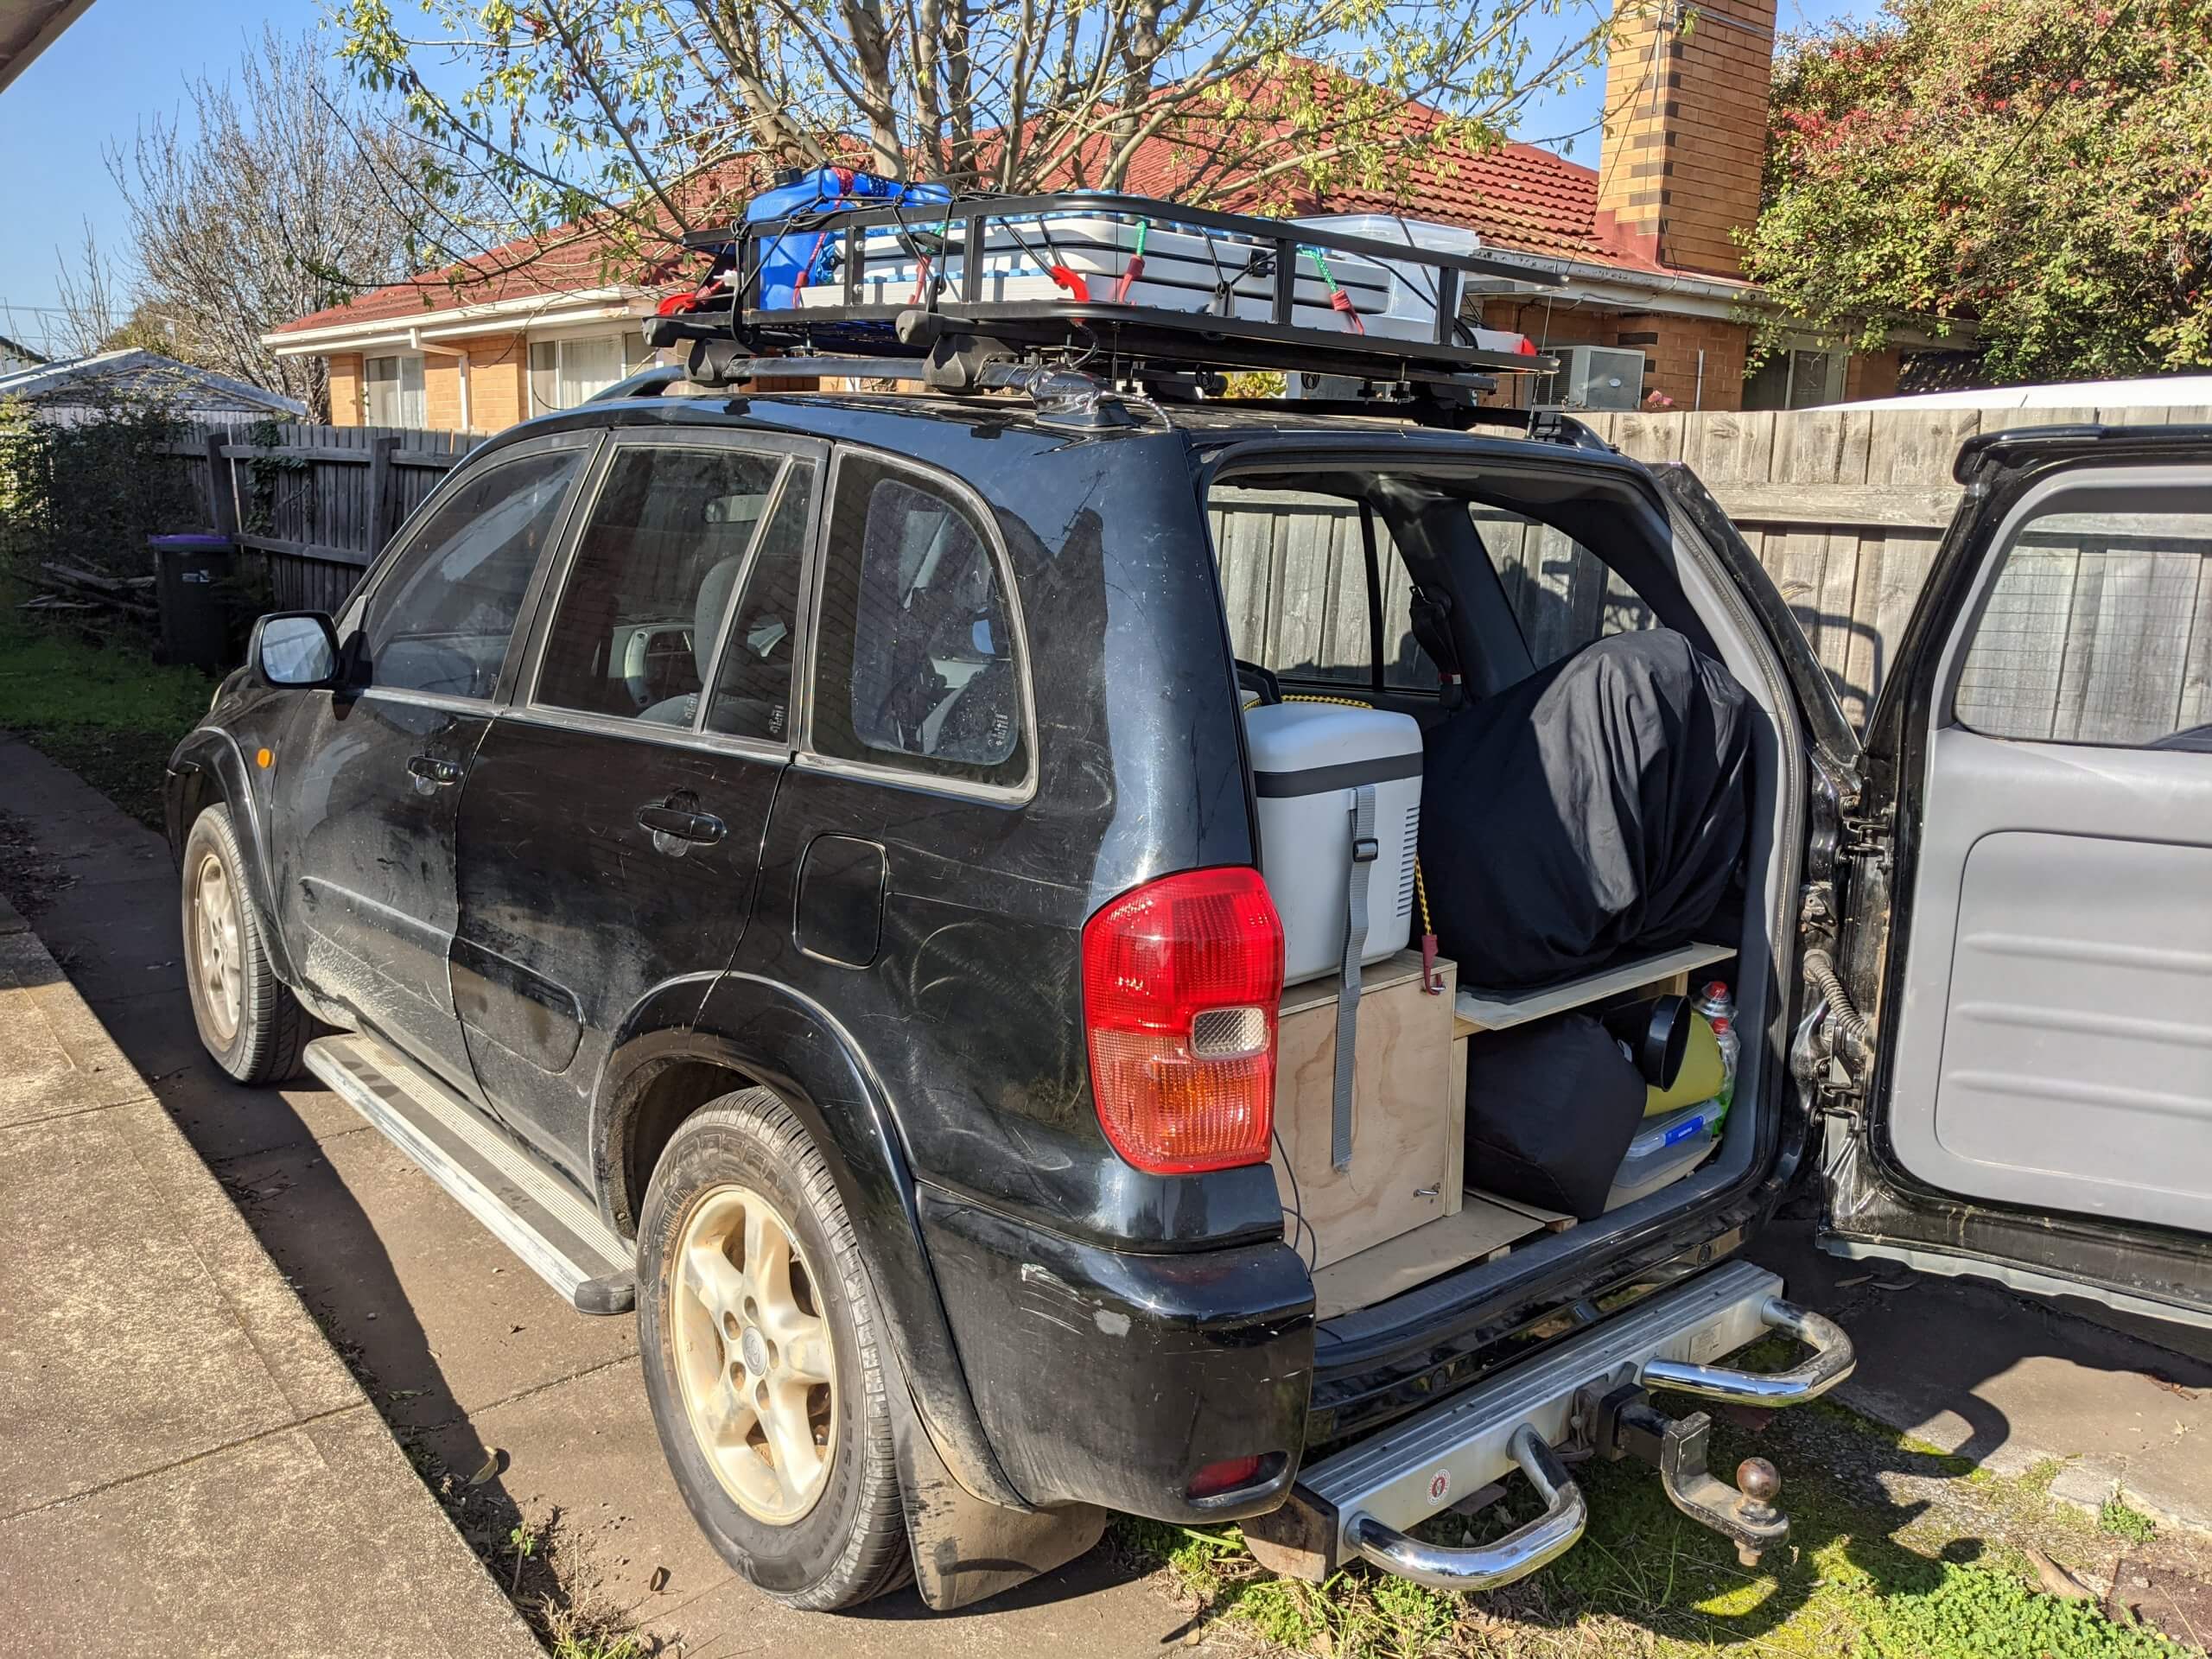 A Toyota RAV4 with the back door open showing it full of camping gear